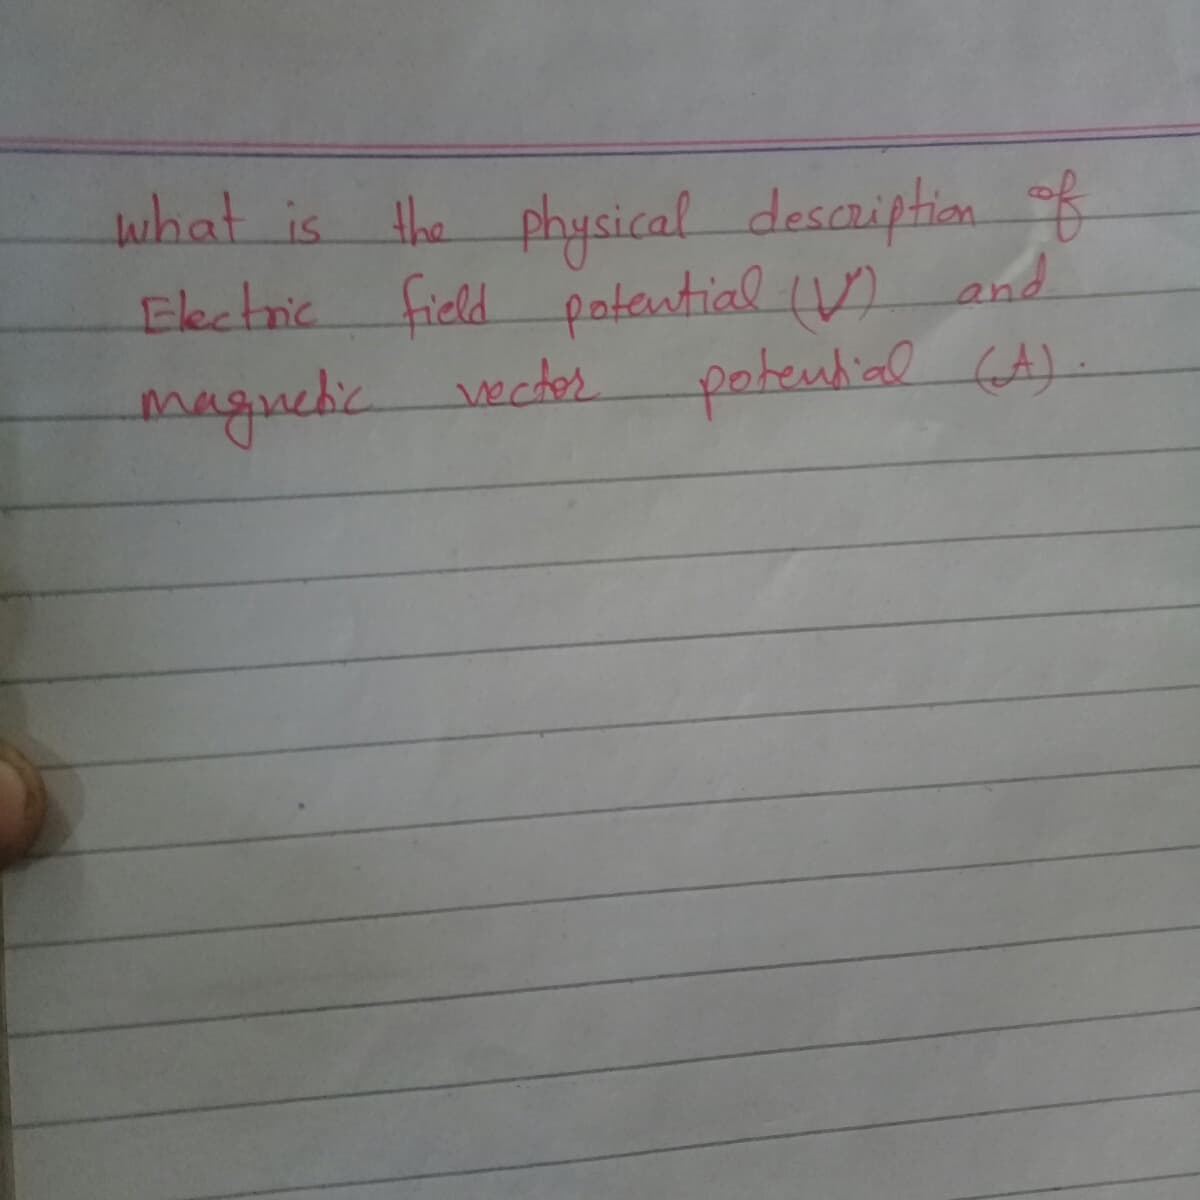 what is the physical descaiption
Electric field patantial (V) and
maguchic
सलकिक्सा
vecter.
potential (A)
